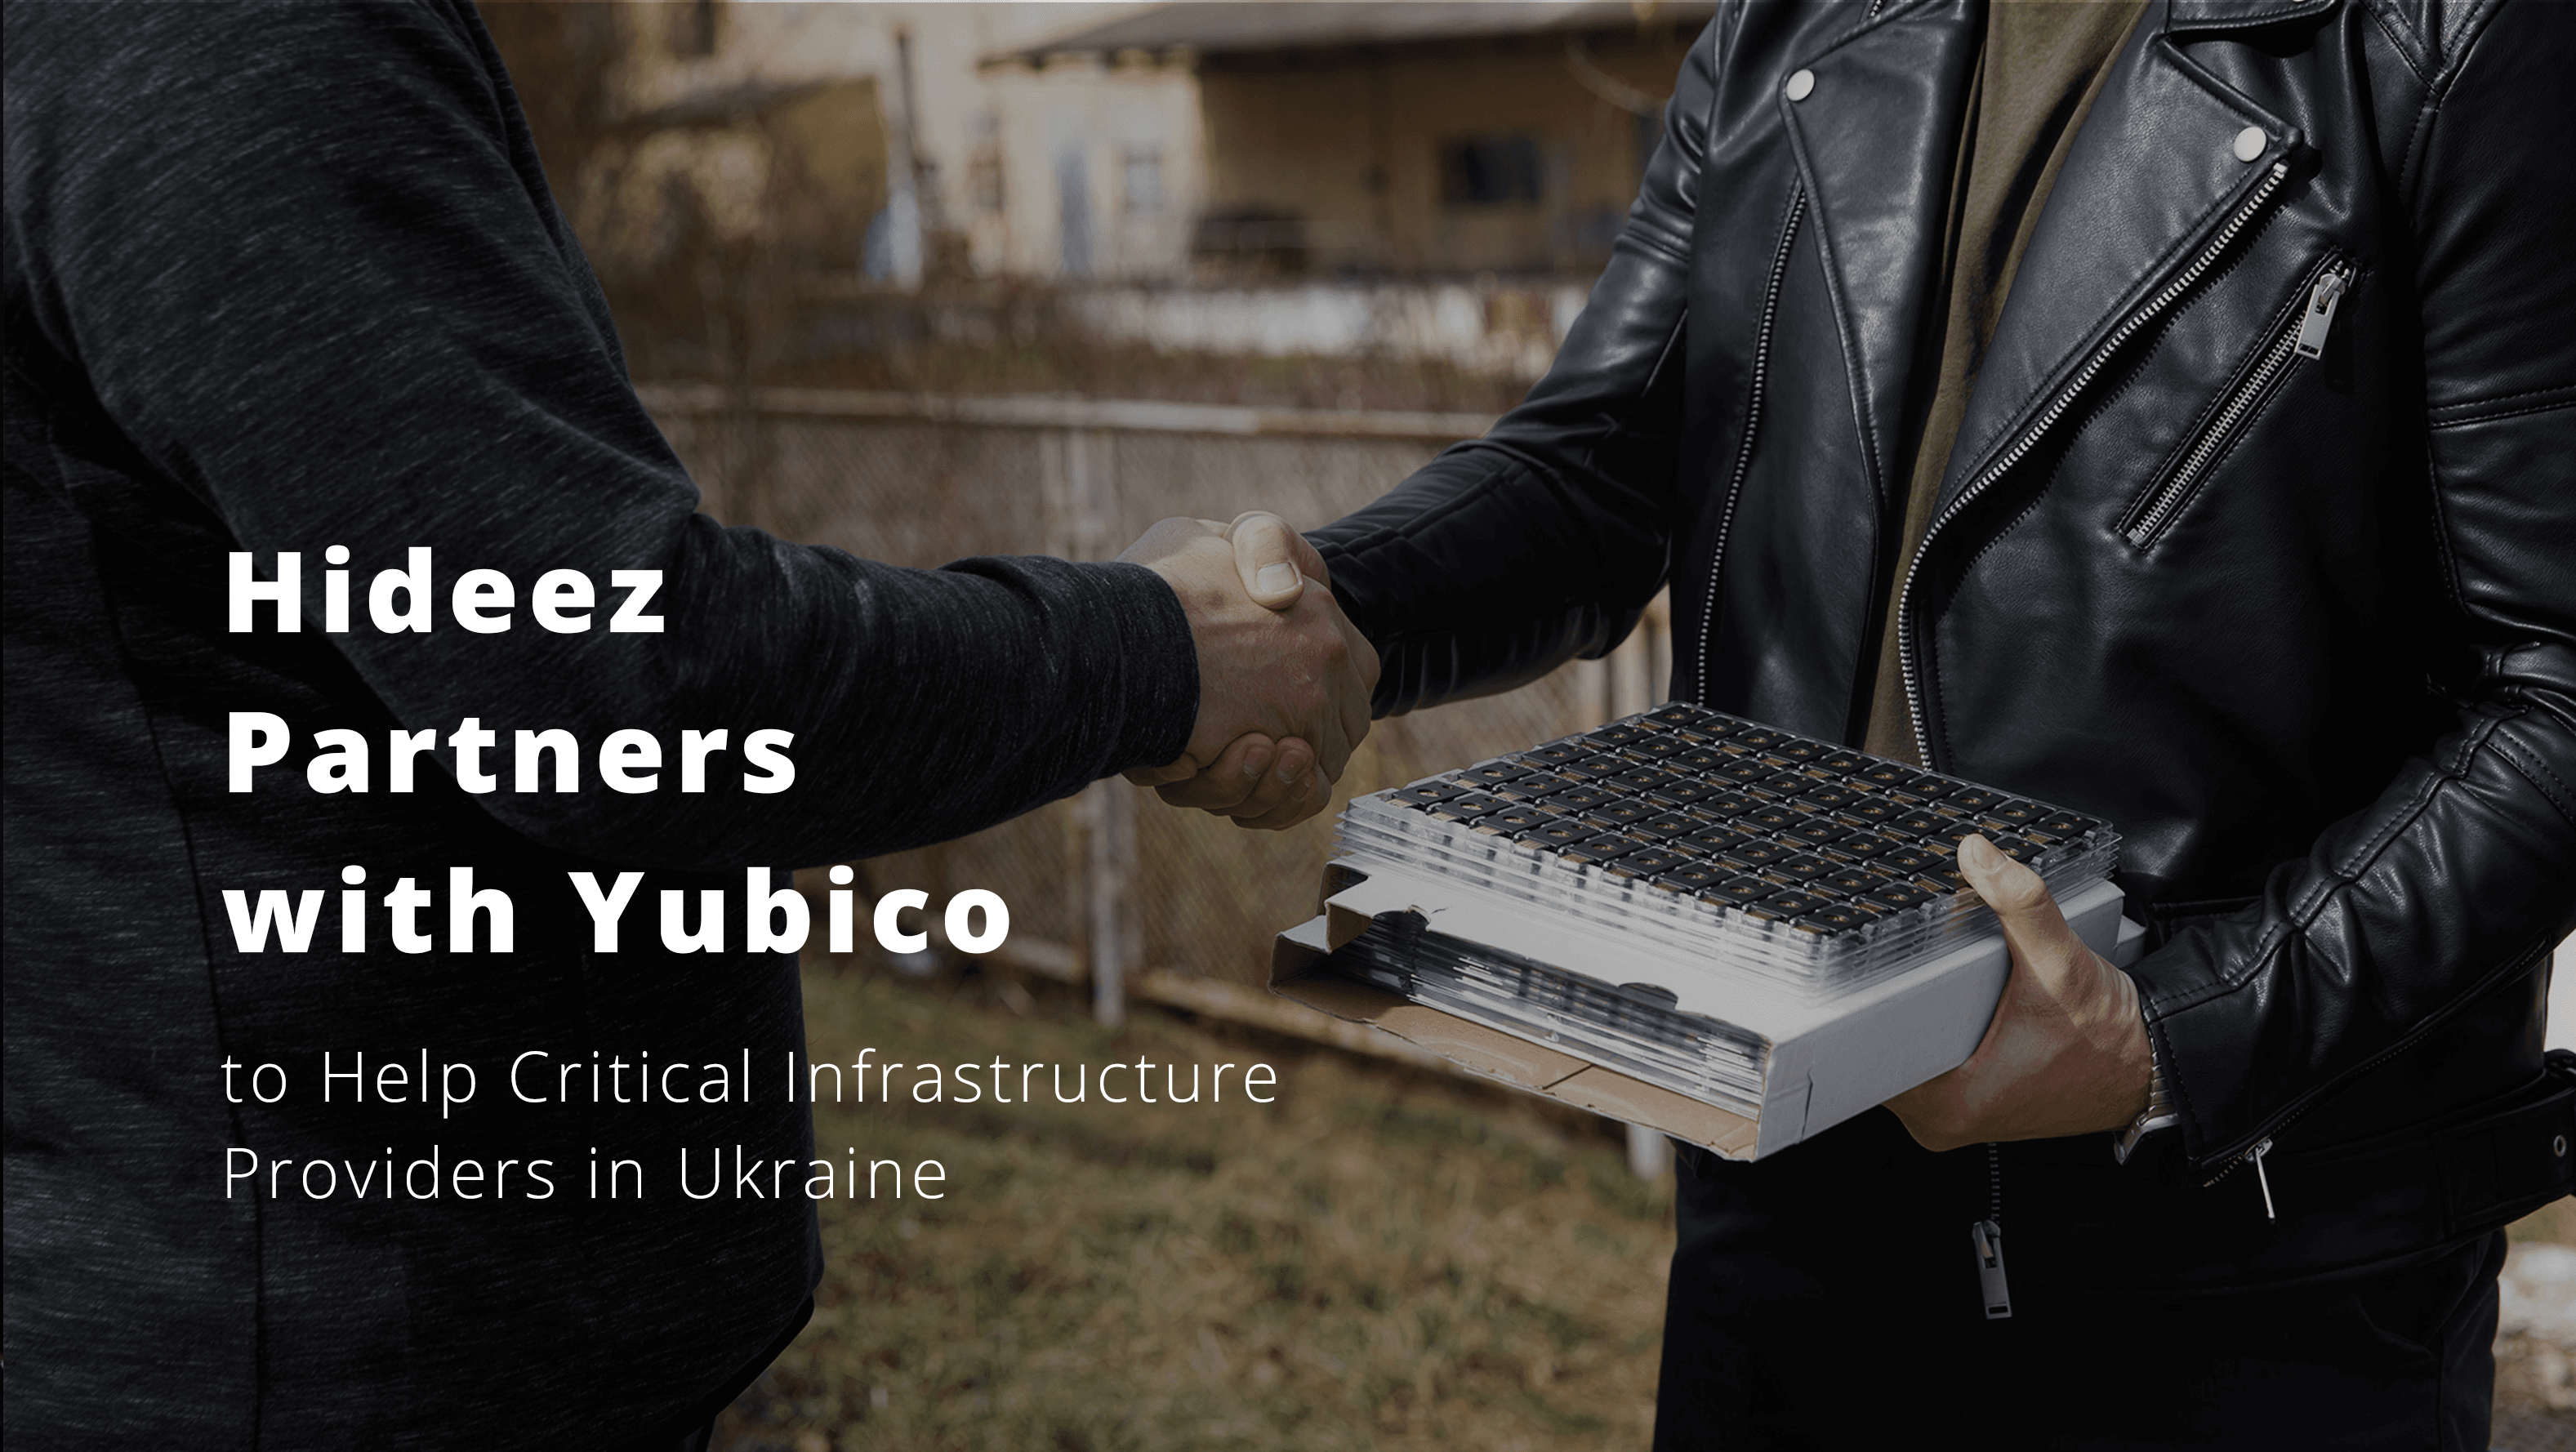 <b>Hideez joins forces with Yubico to Help State-Owned Companies in Ukraine Secure Themselves Amid War</b>